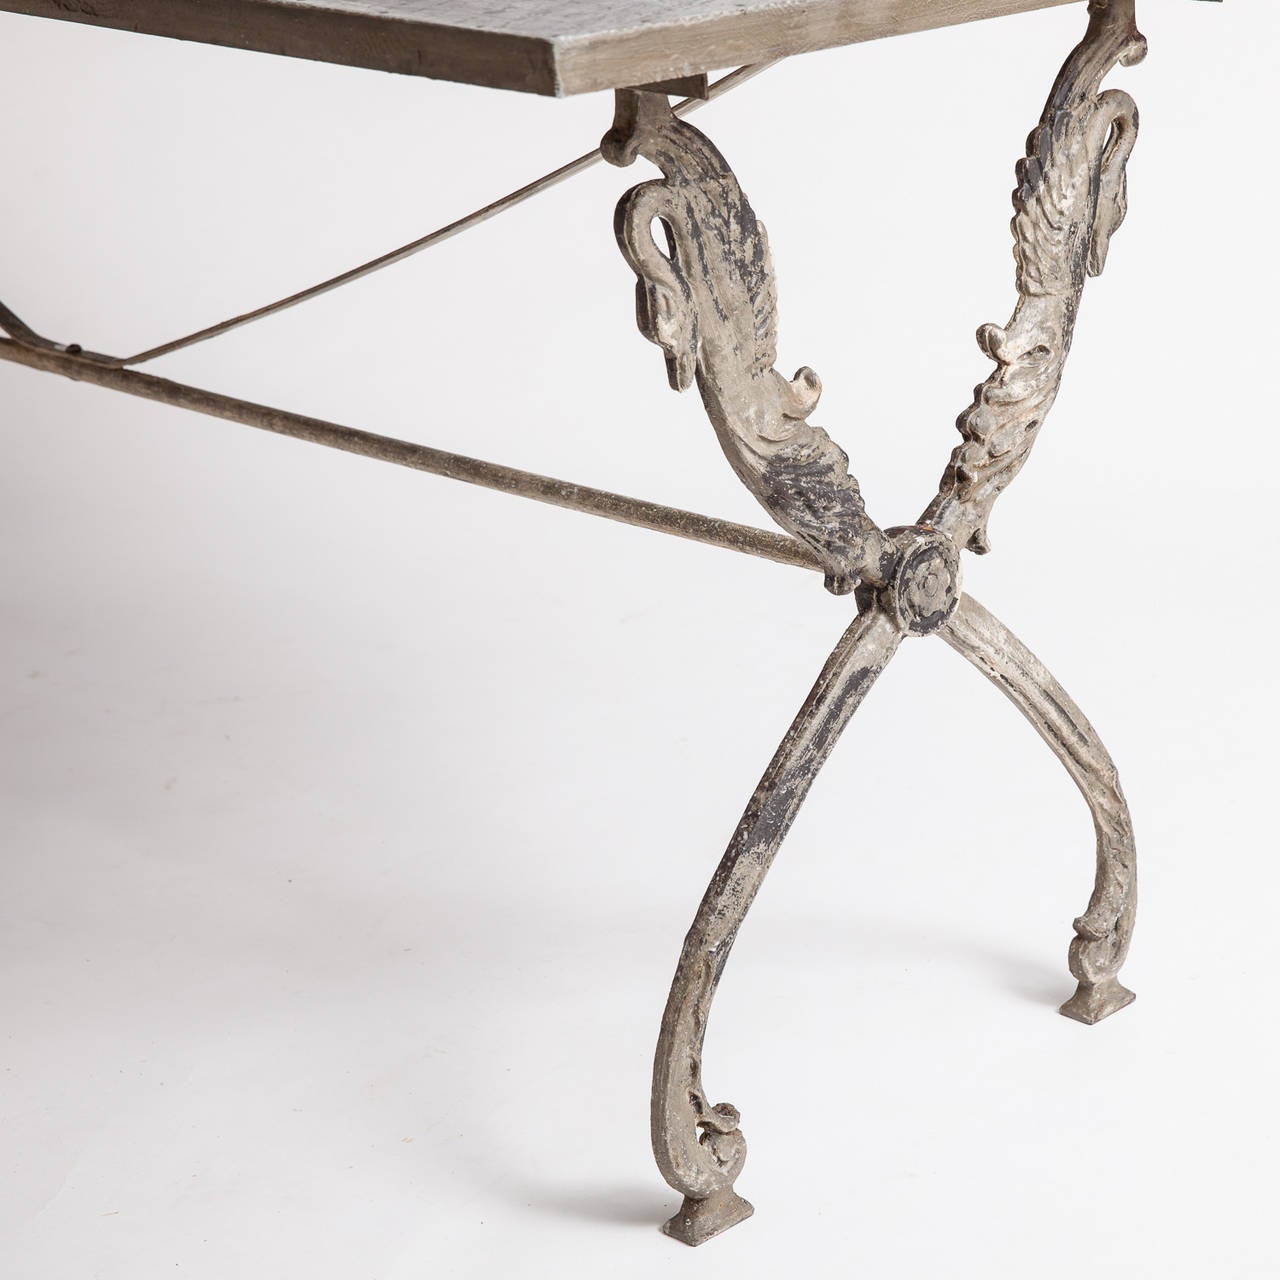 An elegant base depicting carved swans in old greyish paint and an extra long well proportioned top, make this a wonderful table for dining or as a desk with lots of room. The wooden top is covered with hammered zinc, which gives it a terrific look.